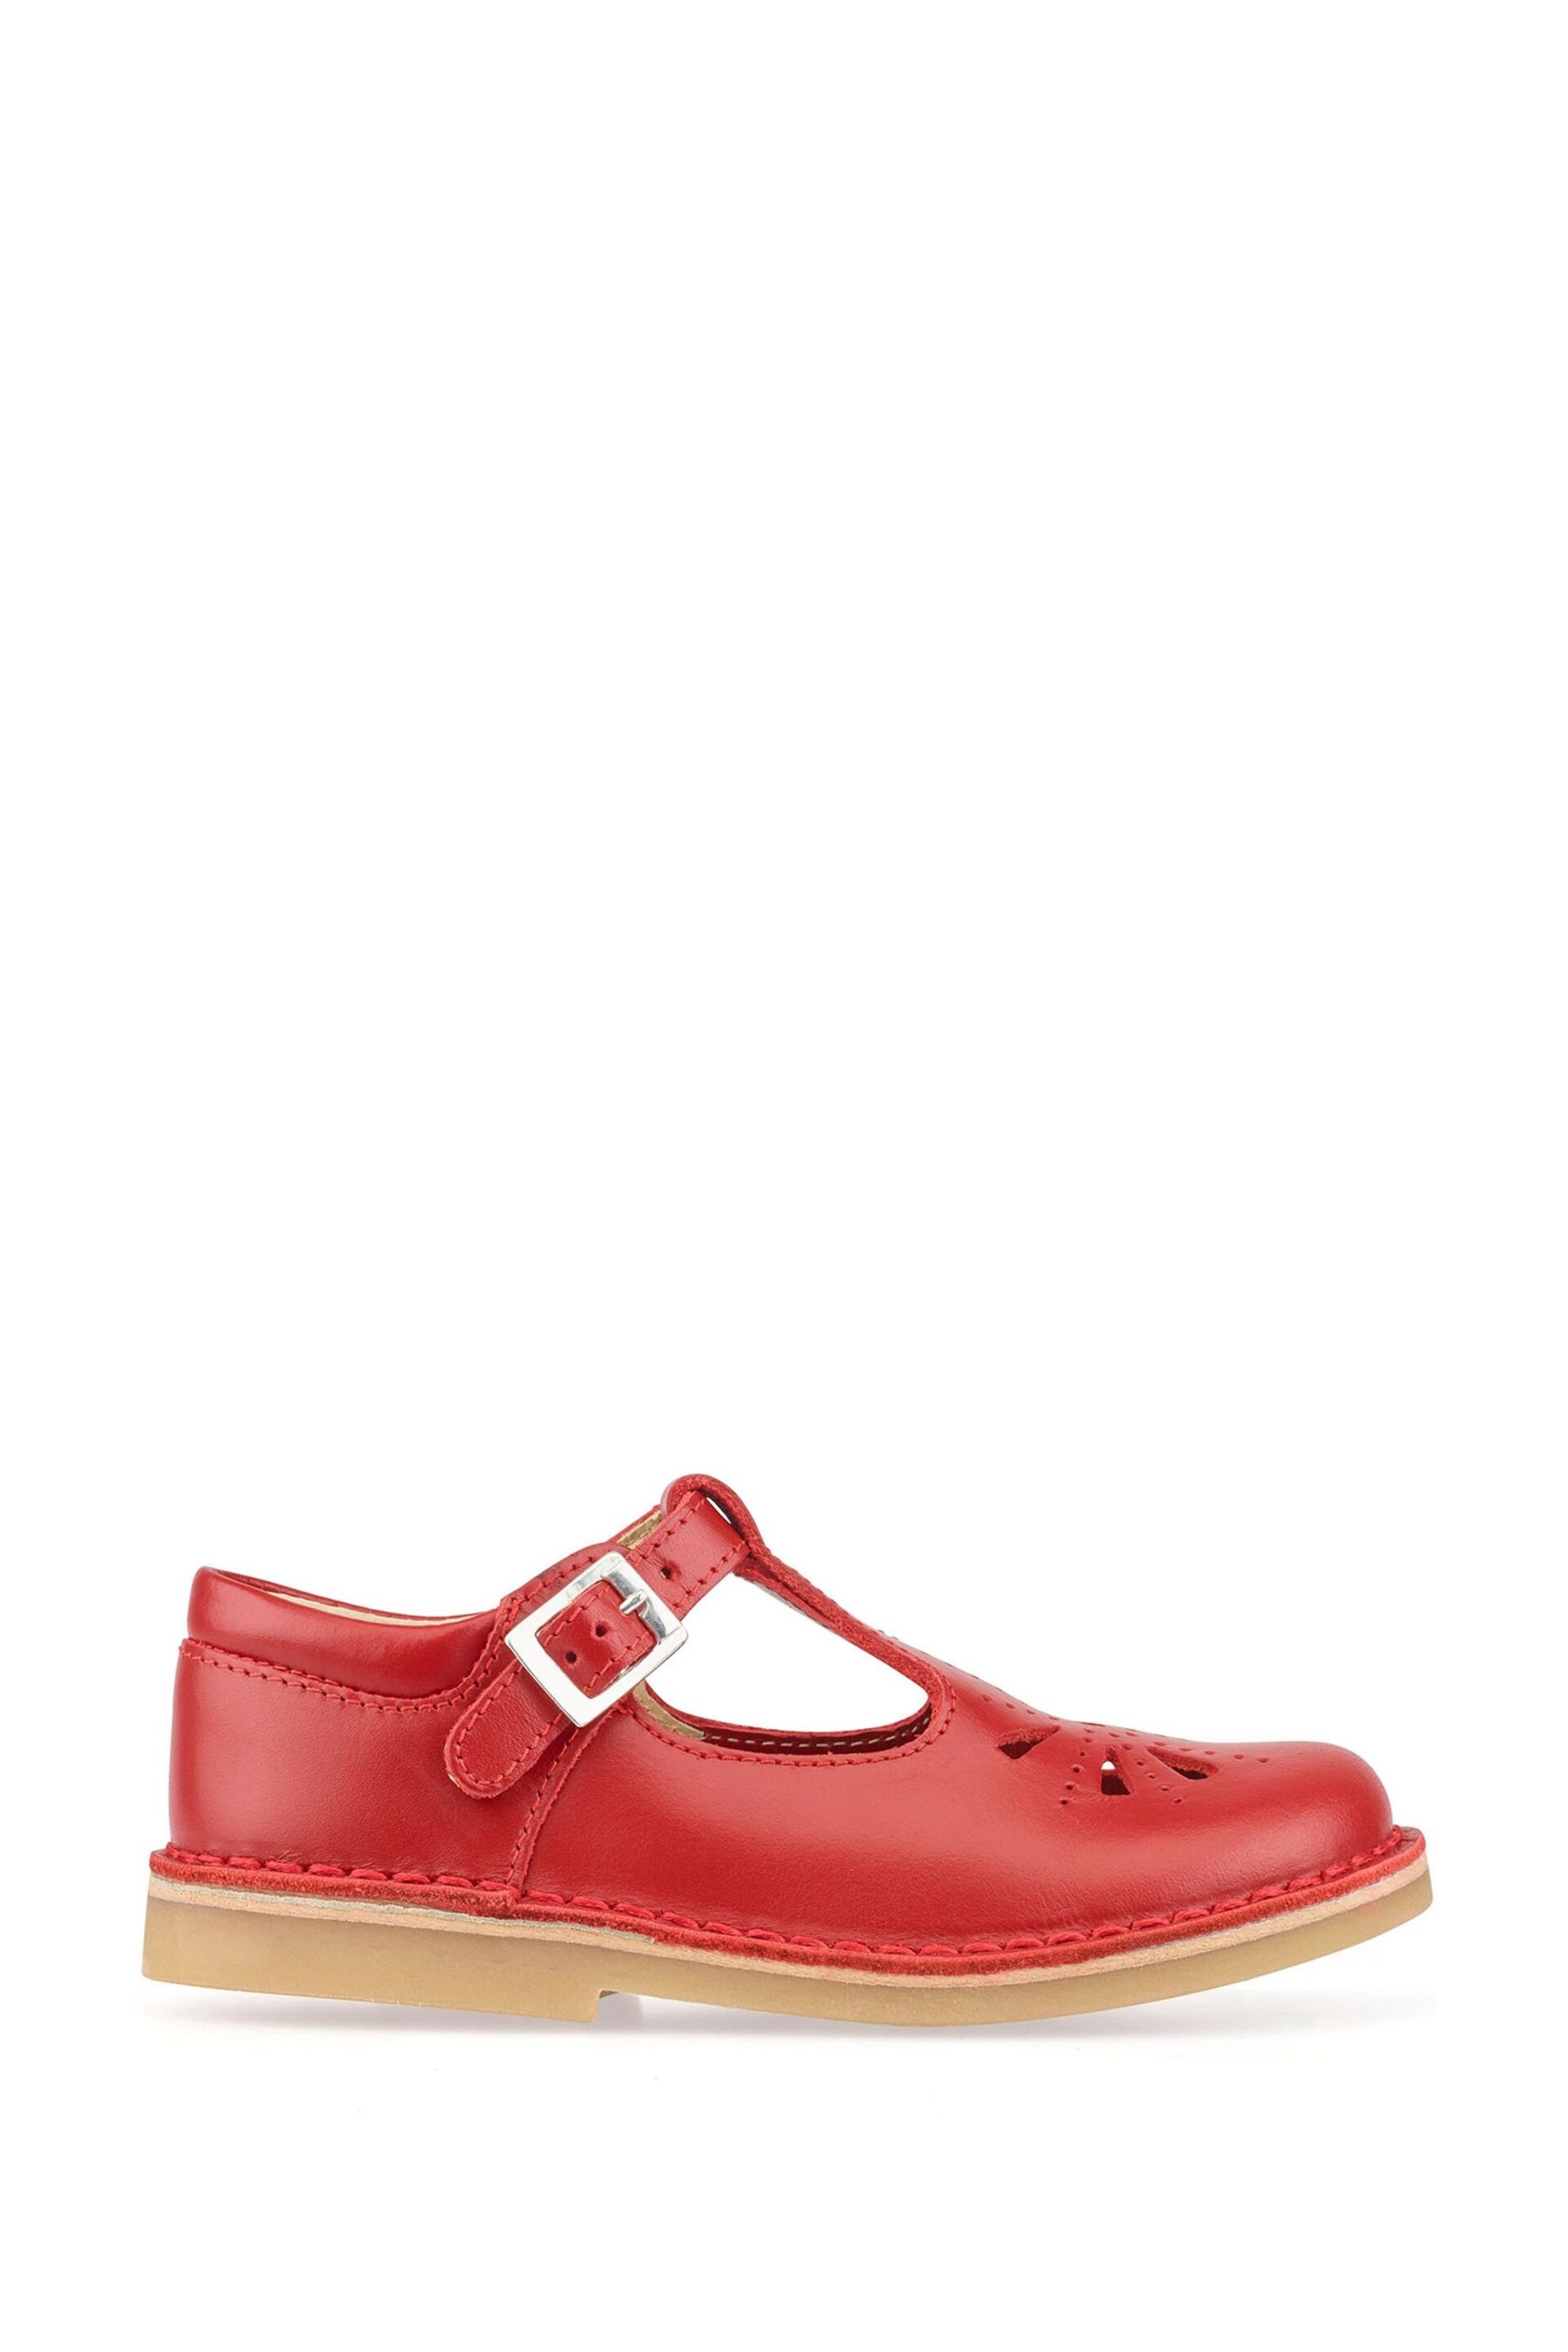 Start-Rite Lottie Red Leather Classic T-Bar Shoes F Fit - Image 1 of 6